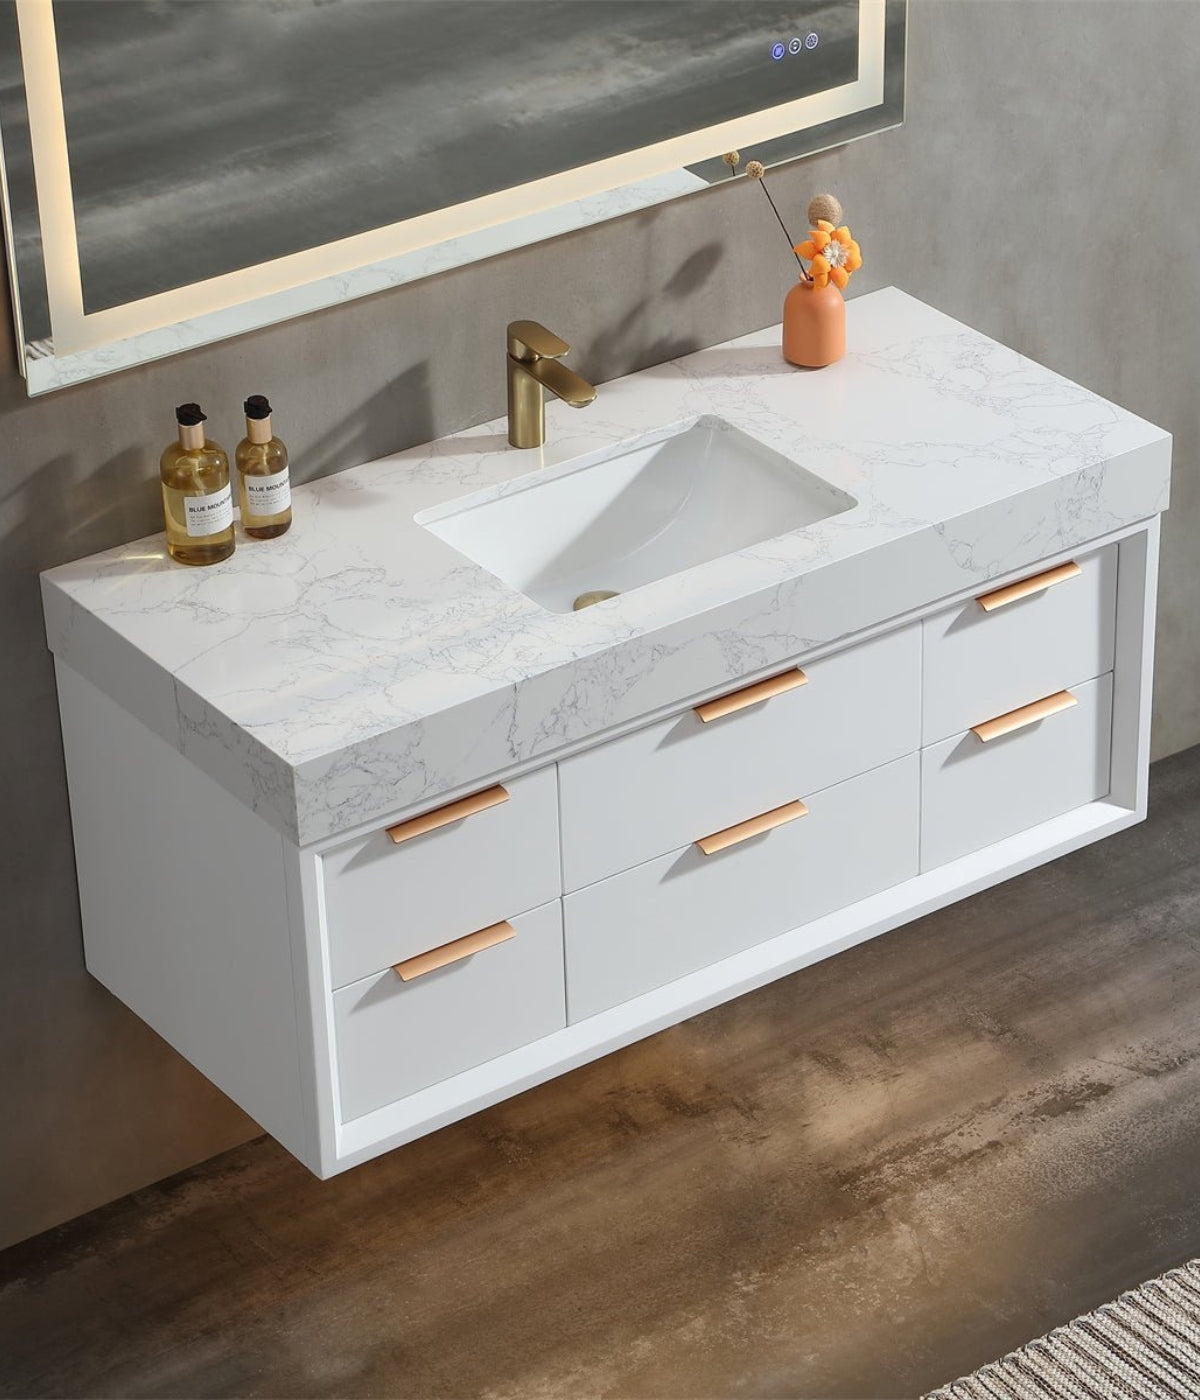 Take a look at our Glam 36 bathroom wood vanity from ExbriteUSa